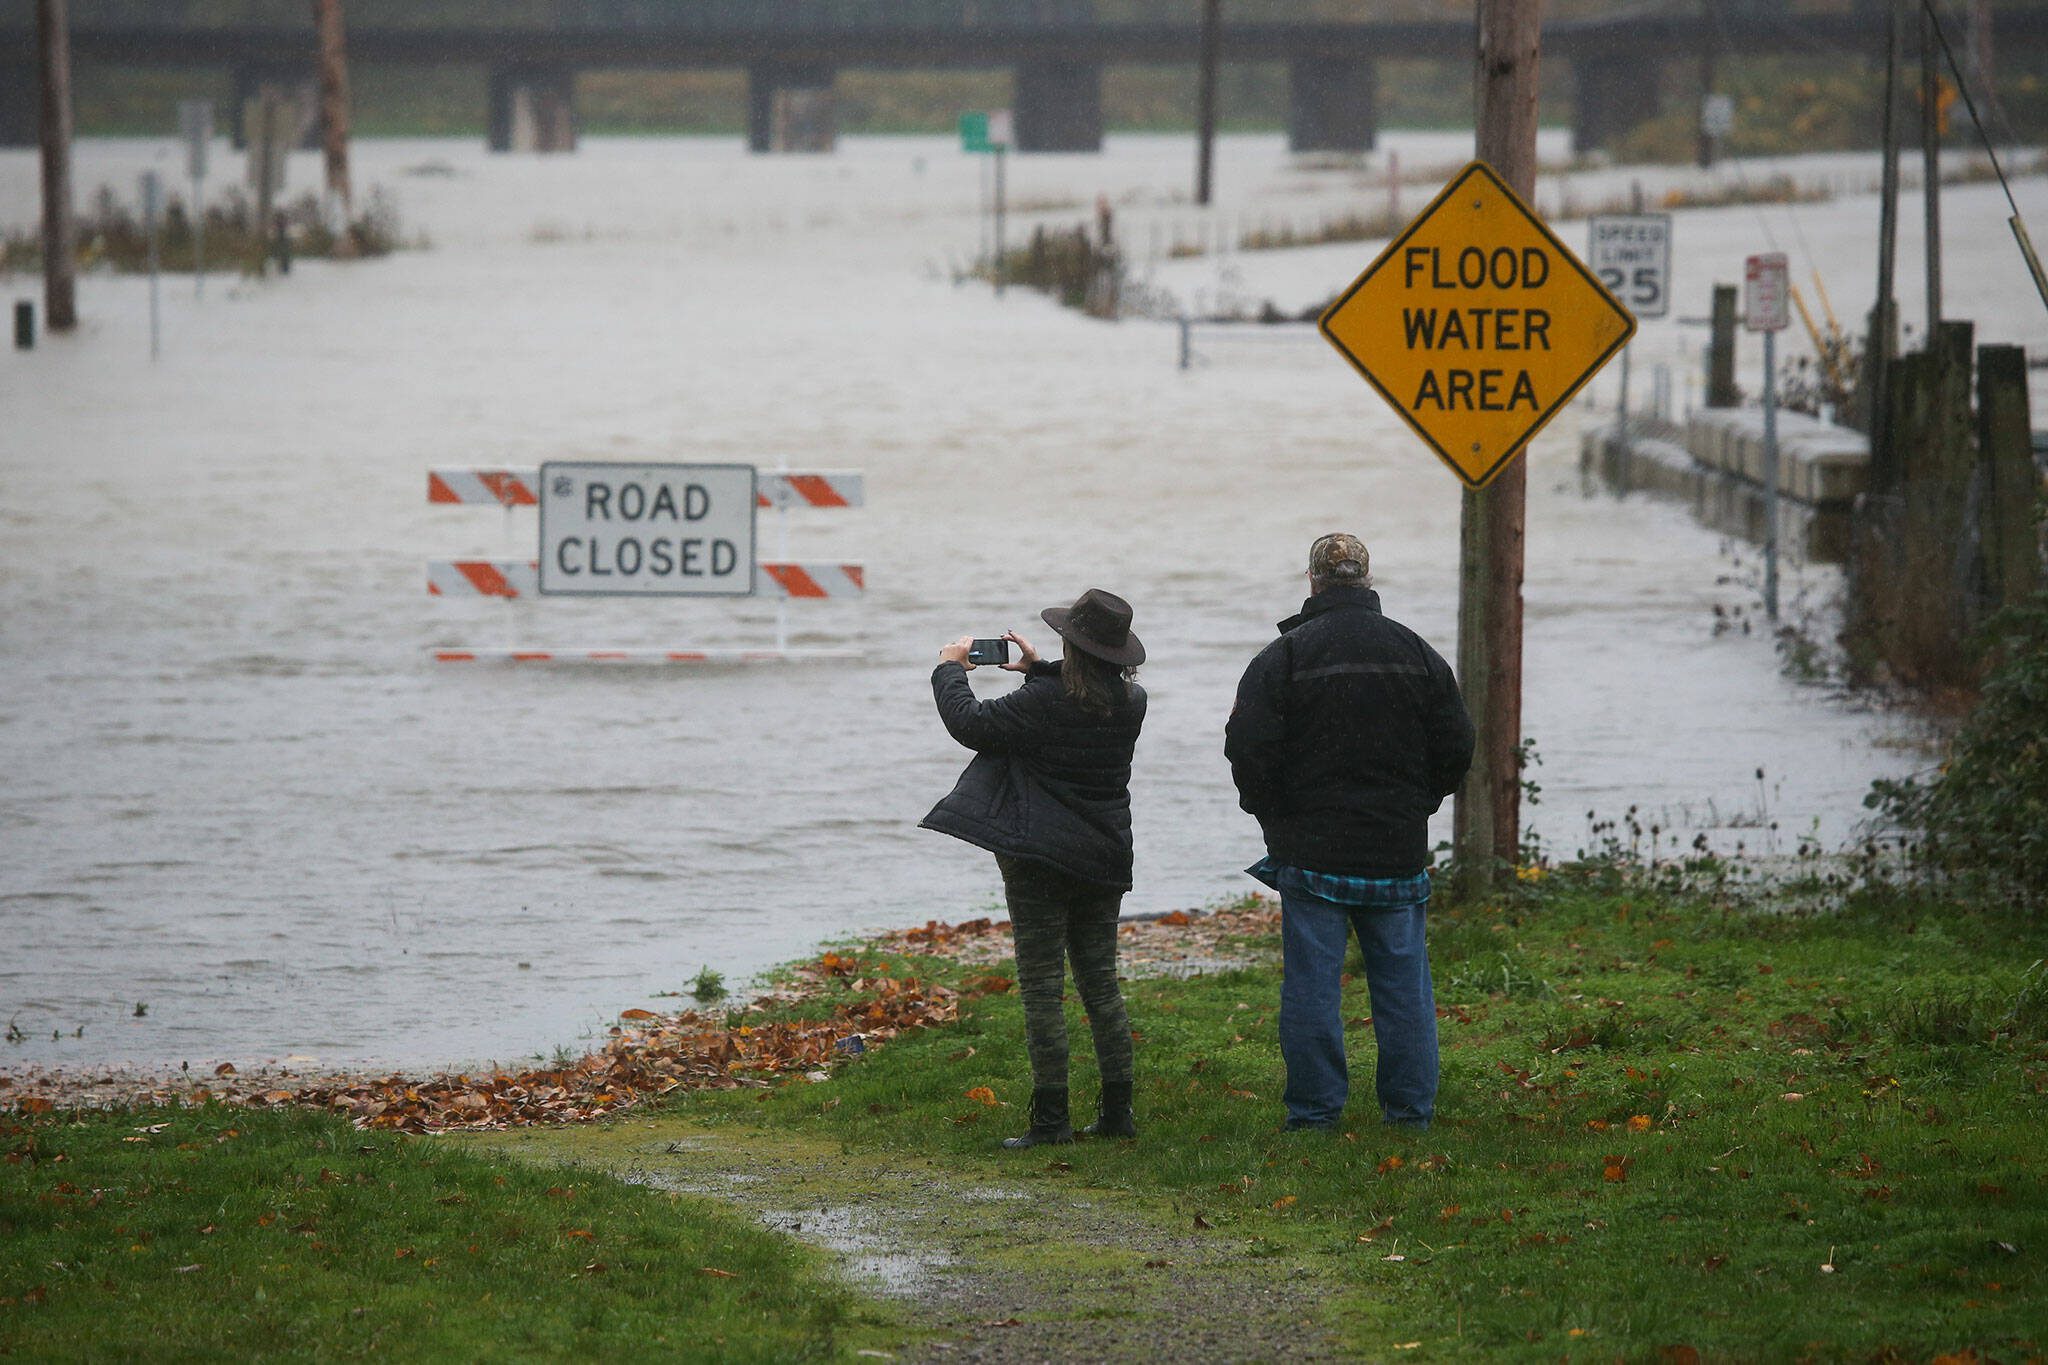 Pam and Ken Owens, of Granite Falls, stop to take cell phone photos of the flooding along Lincoln Avenue on Monday, Nov. 15, 2021 in Snohomish, Washington. The couple were planing to take the road to Monroe for lunch. (Andy Bronson / The Herald)